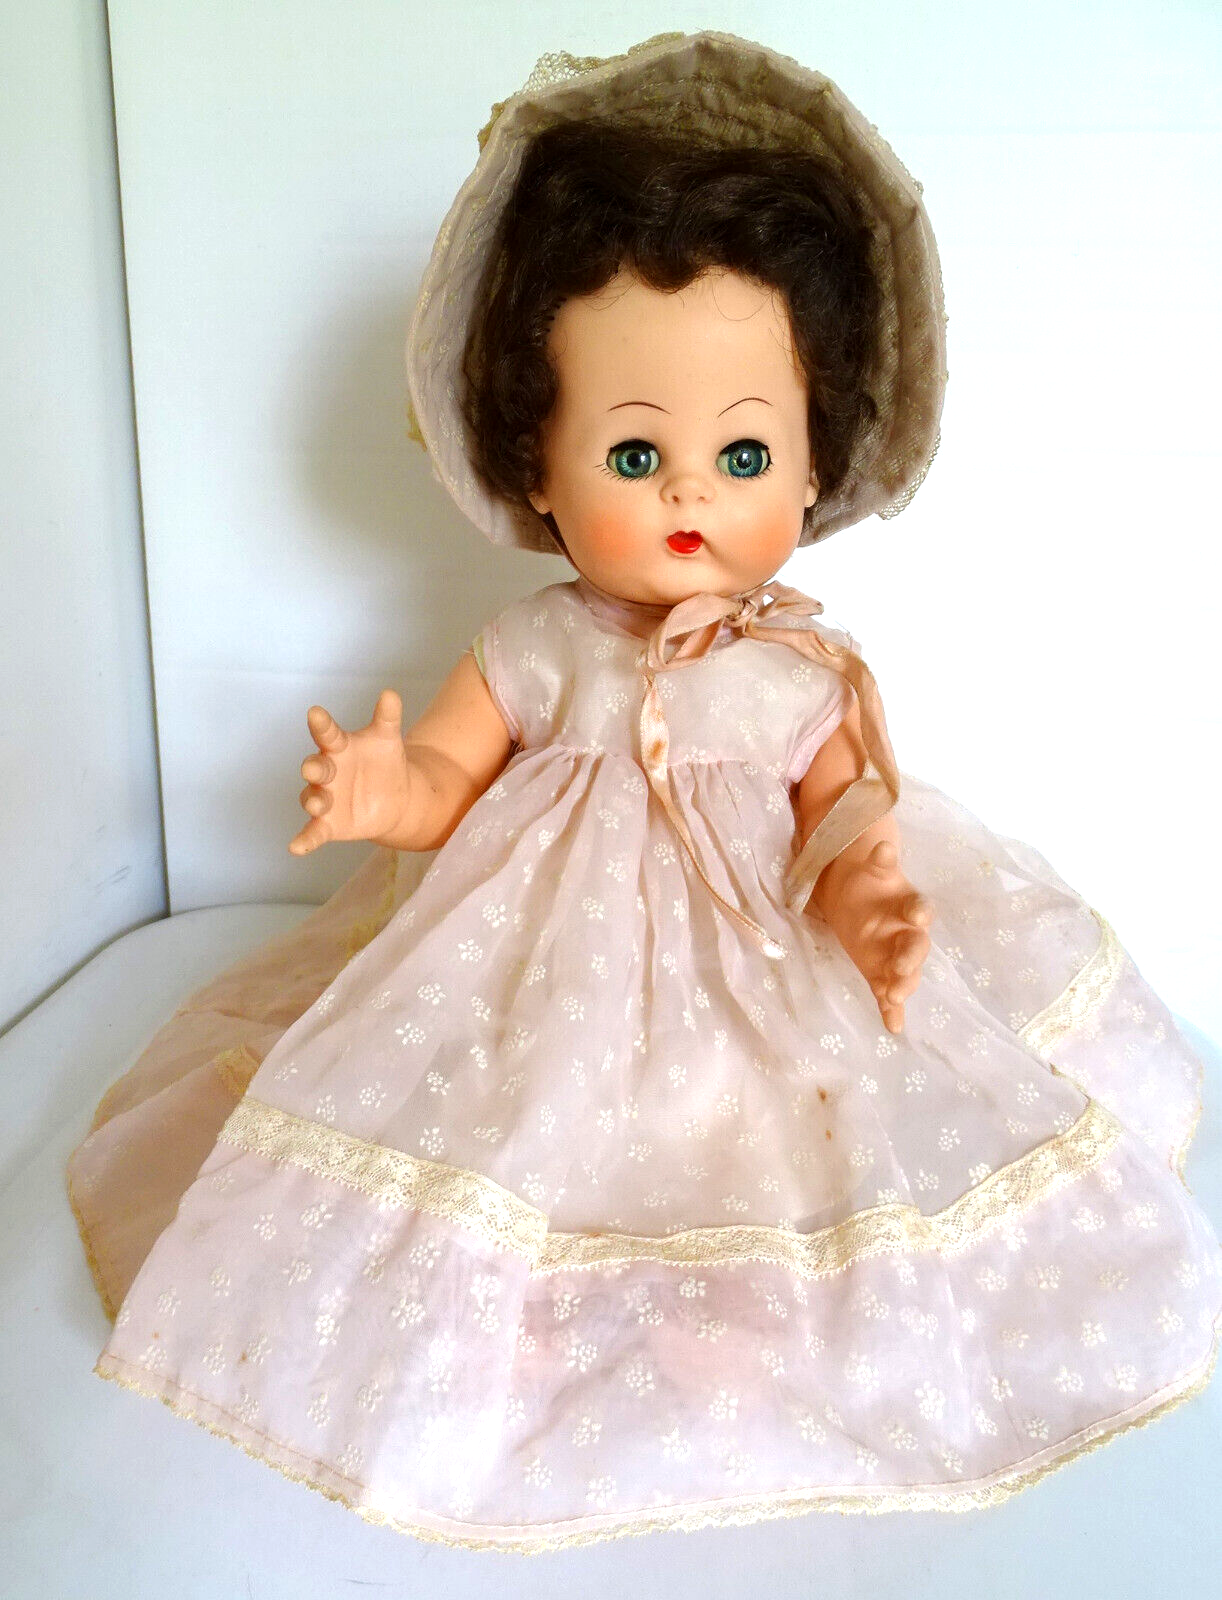 Primary image for Vintage Early 1950's Effanbee 20" Stuffed Vinyl Baby Doll All Original